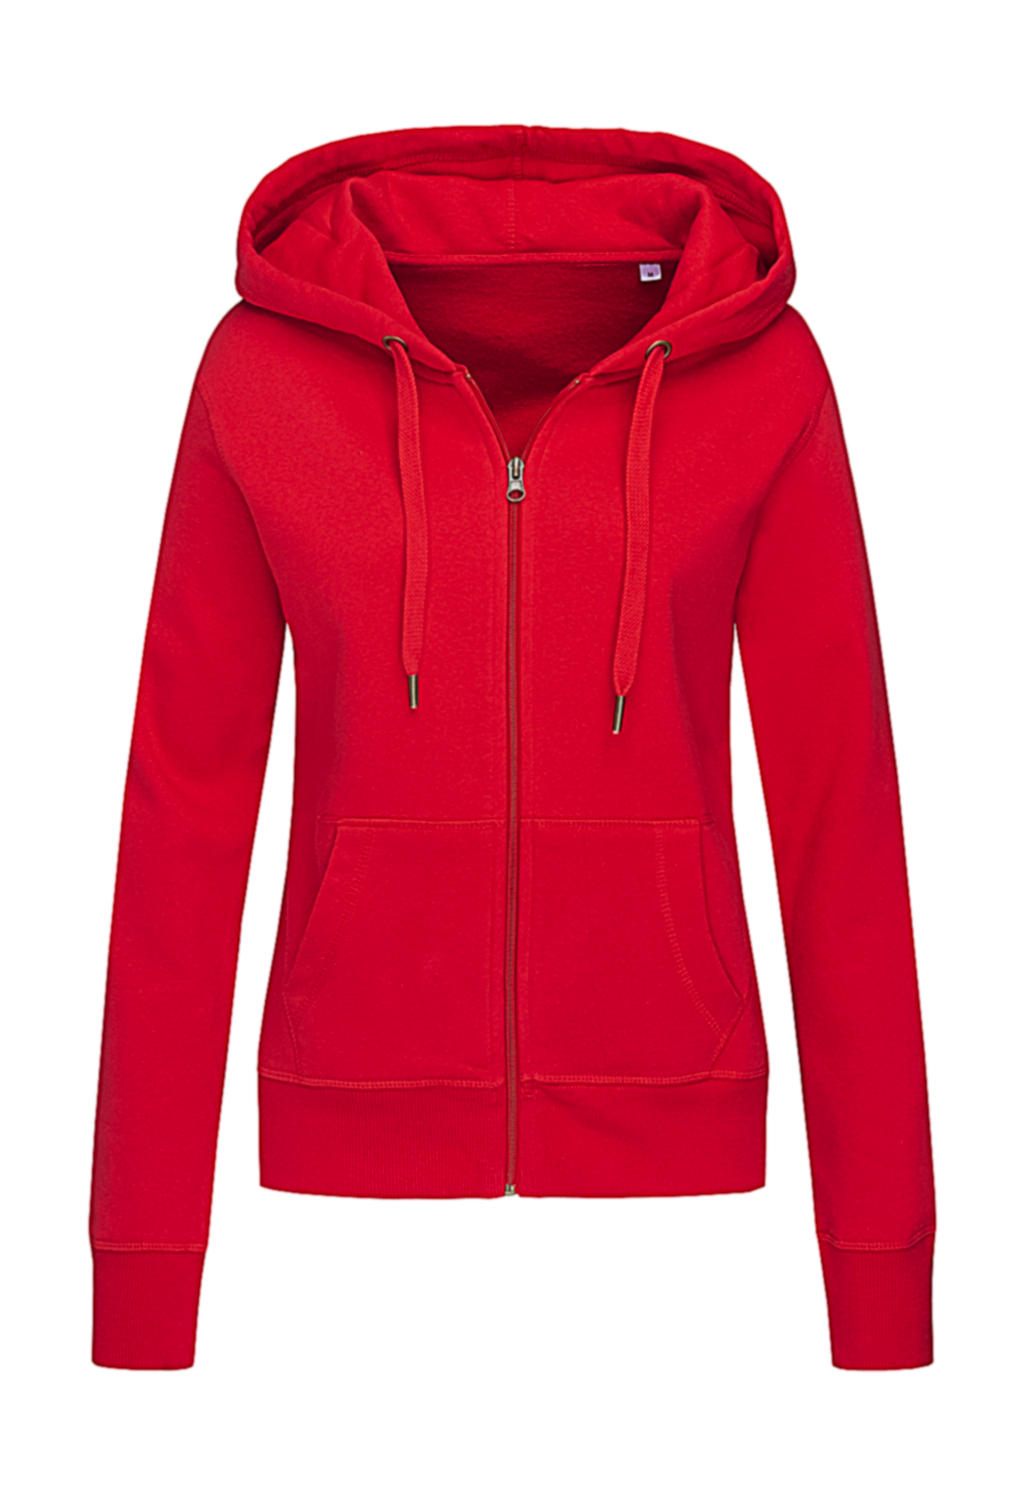  Sweat Jacket Select Women in Farbe Crimson Red